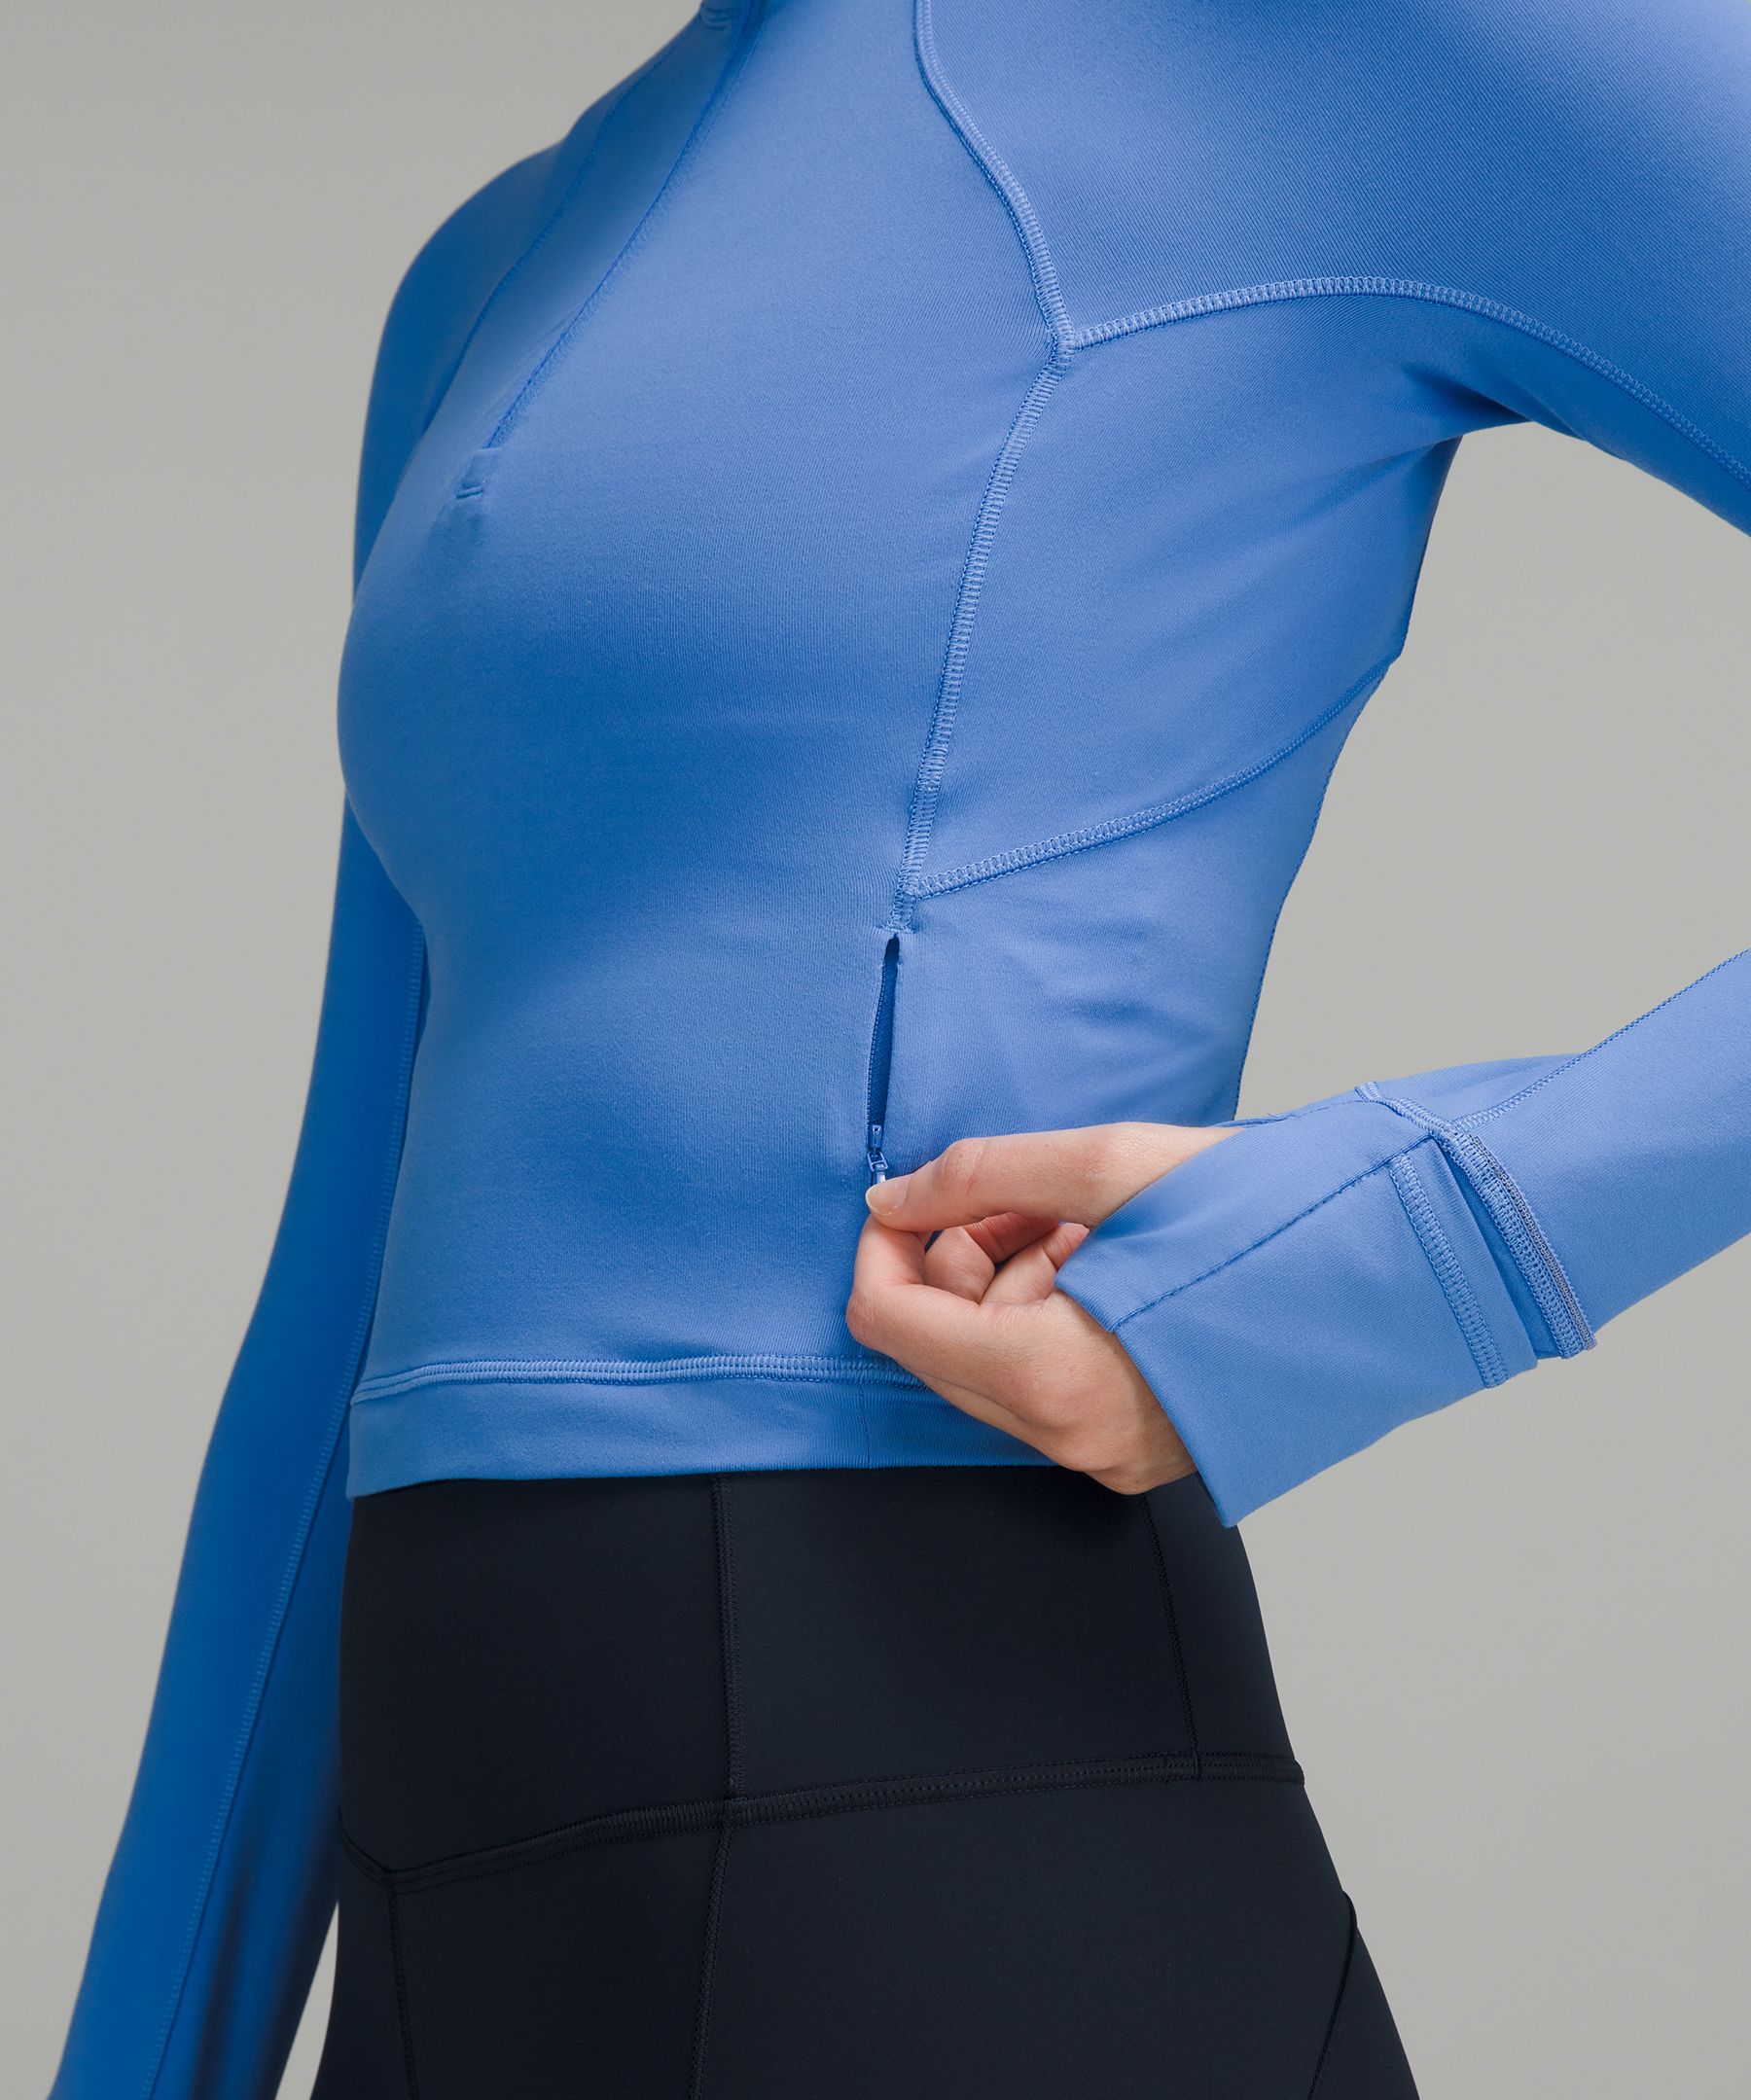 Dupe for the Lululemon (It's Rulu Run Cropped half Zip) not the